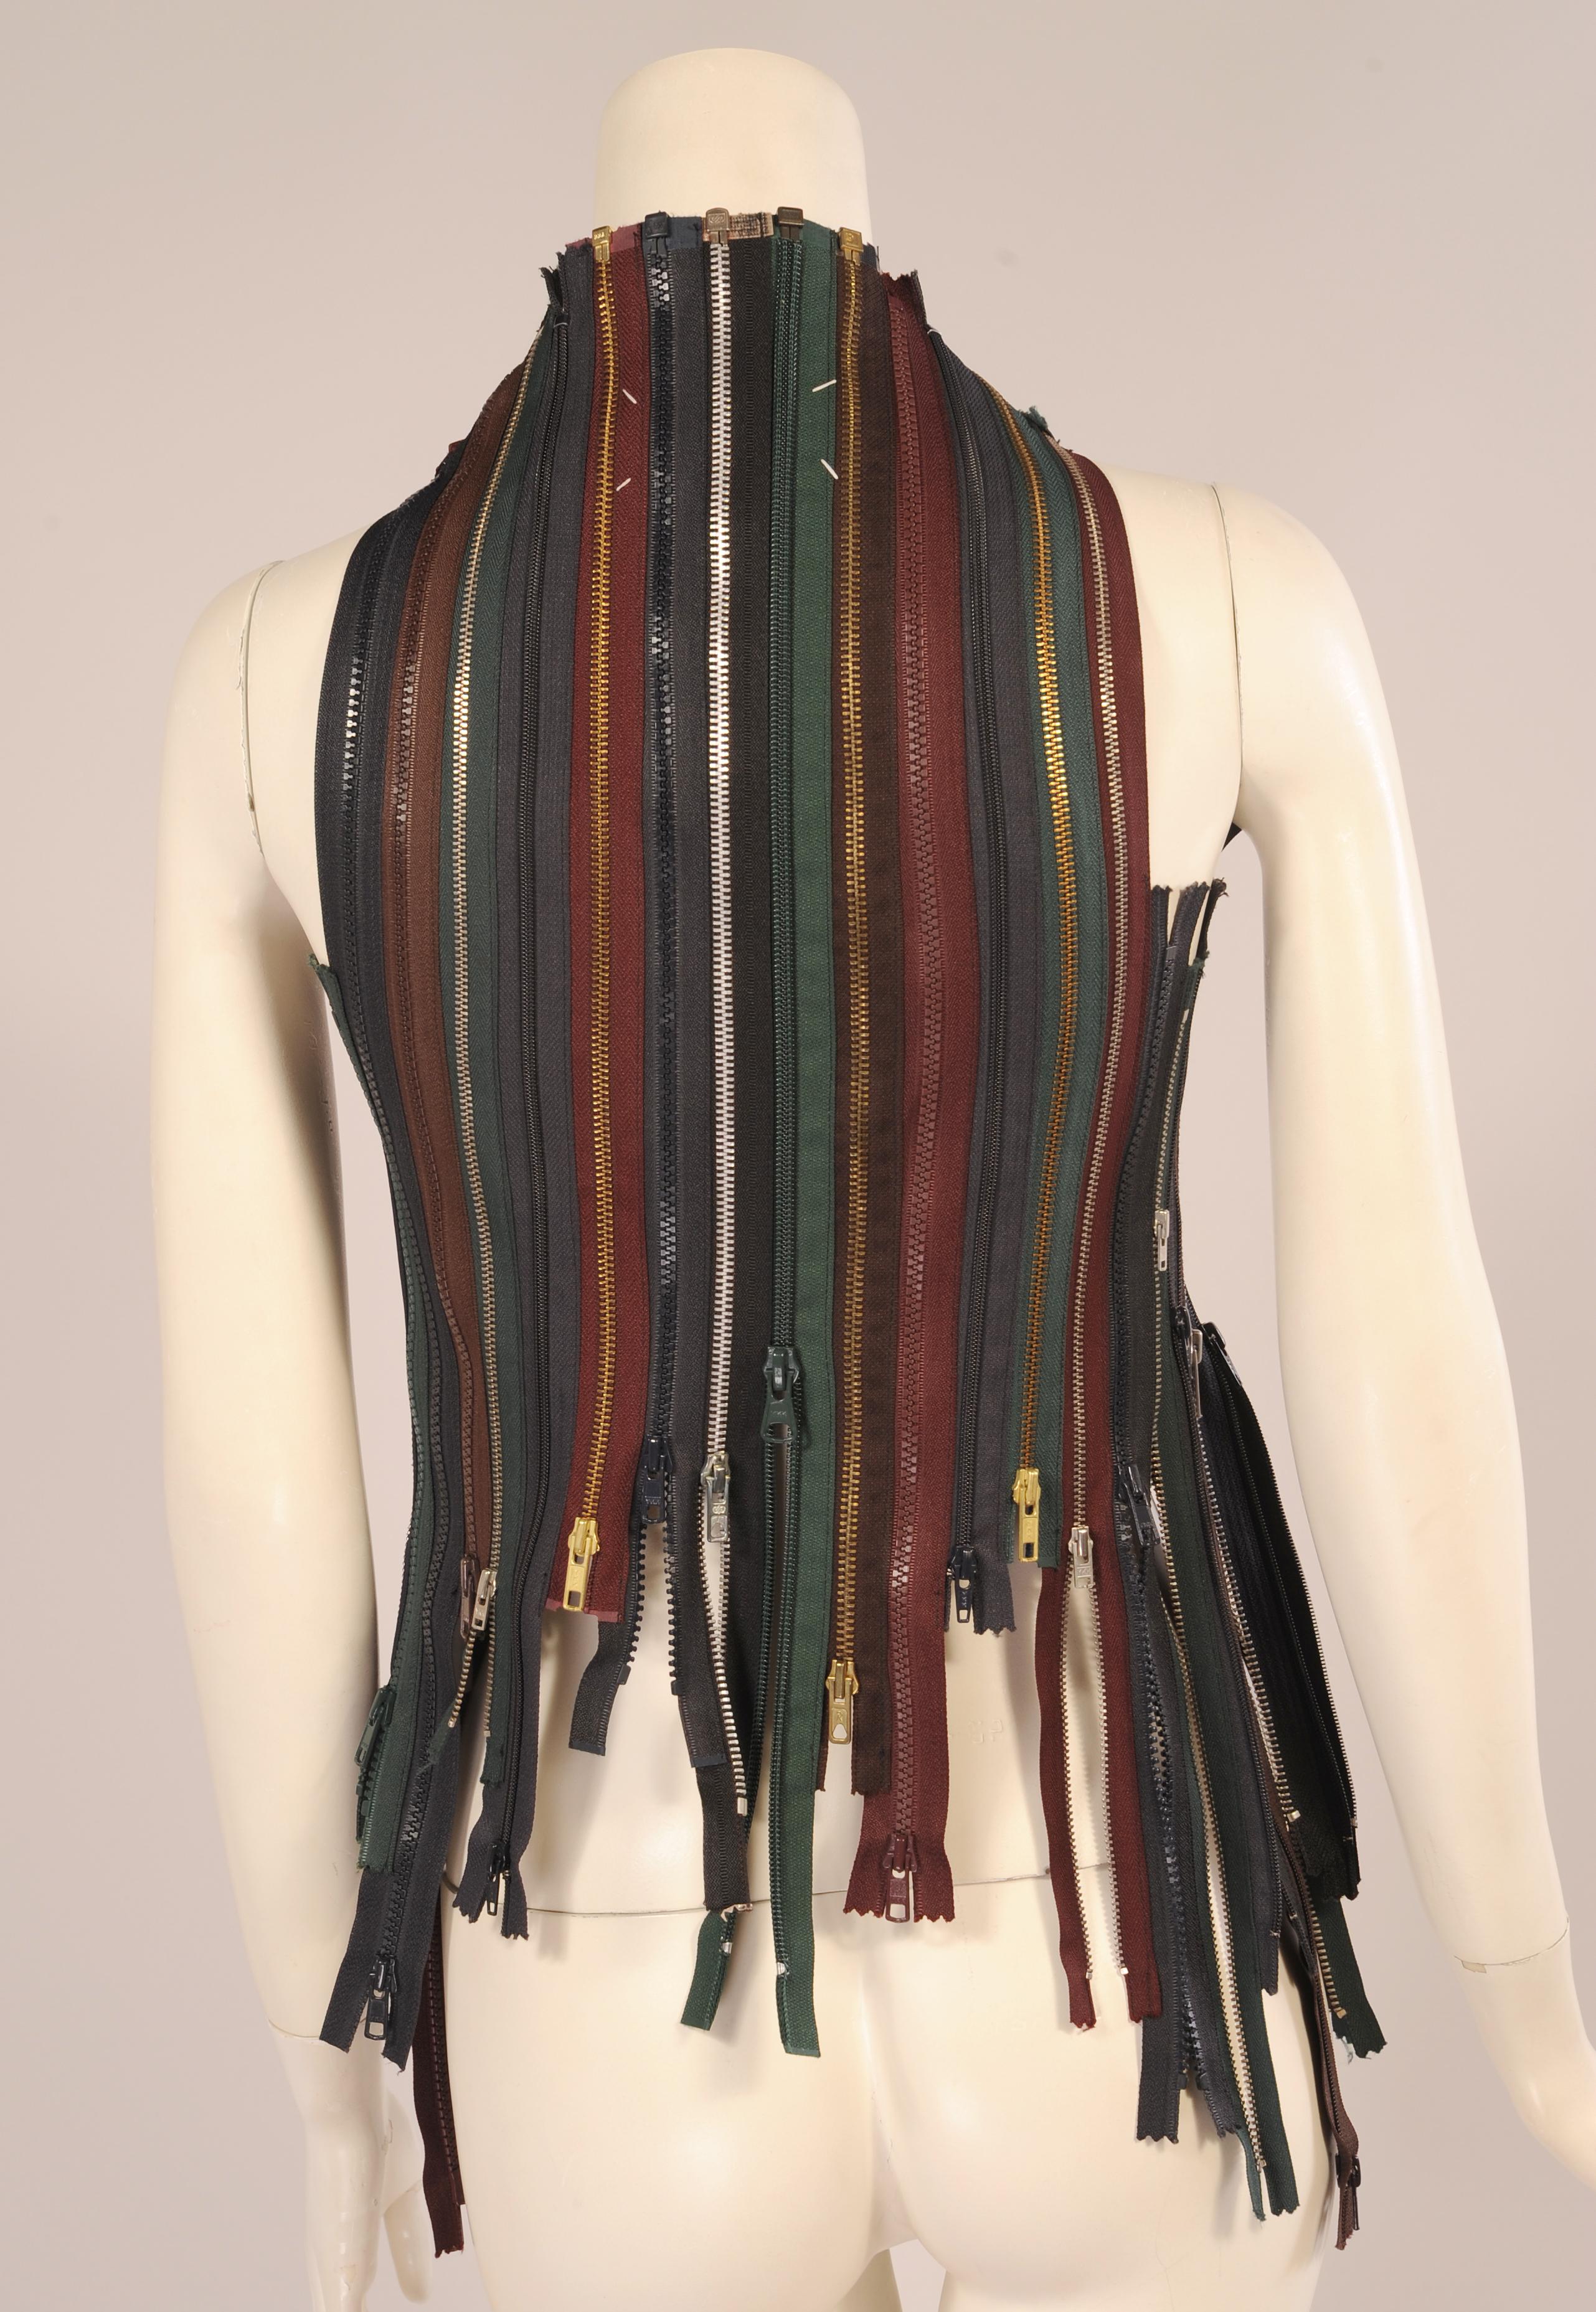 Black Martin Margiela Vest Made from Zippers Artisanal Collection 1999